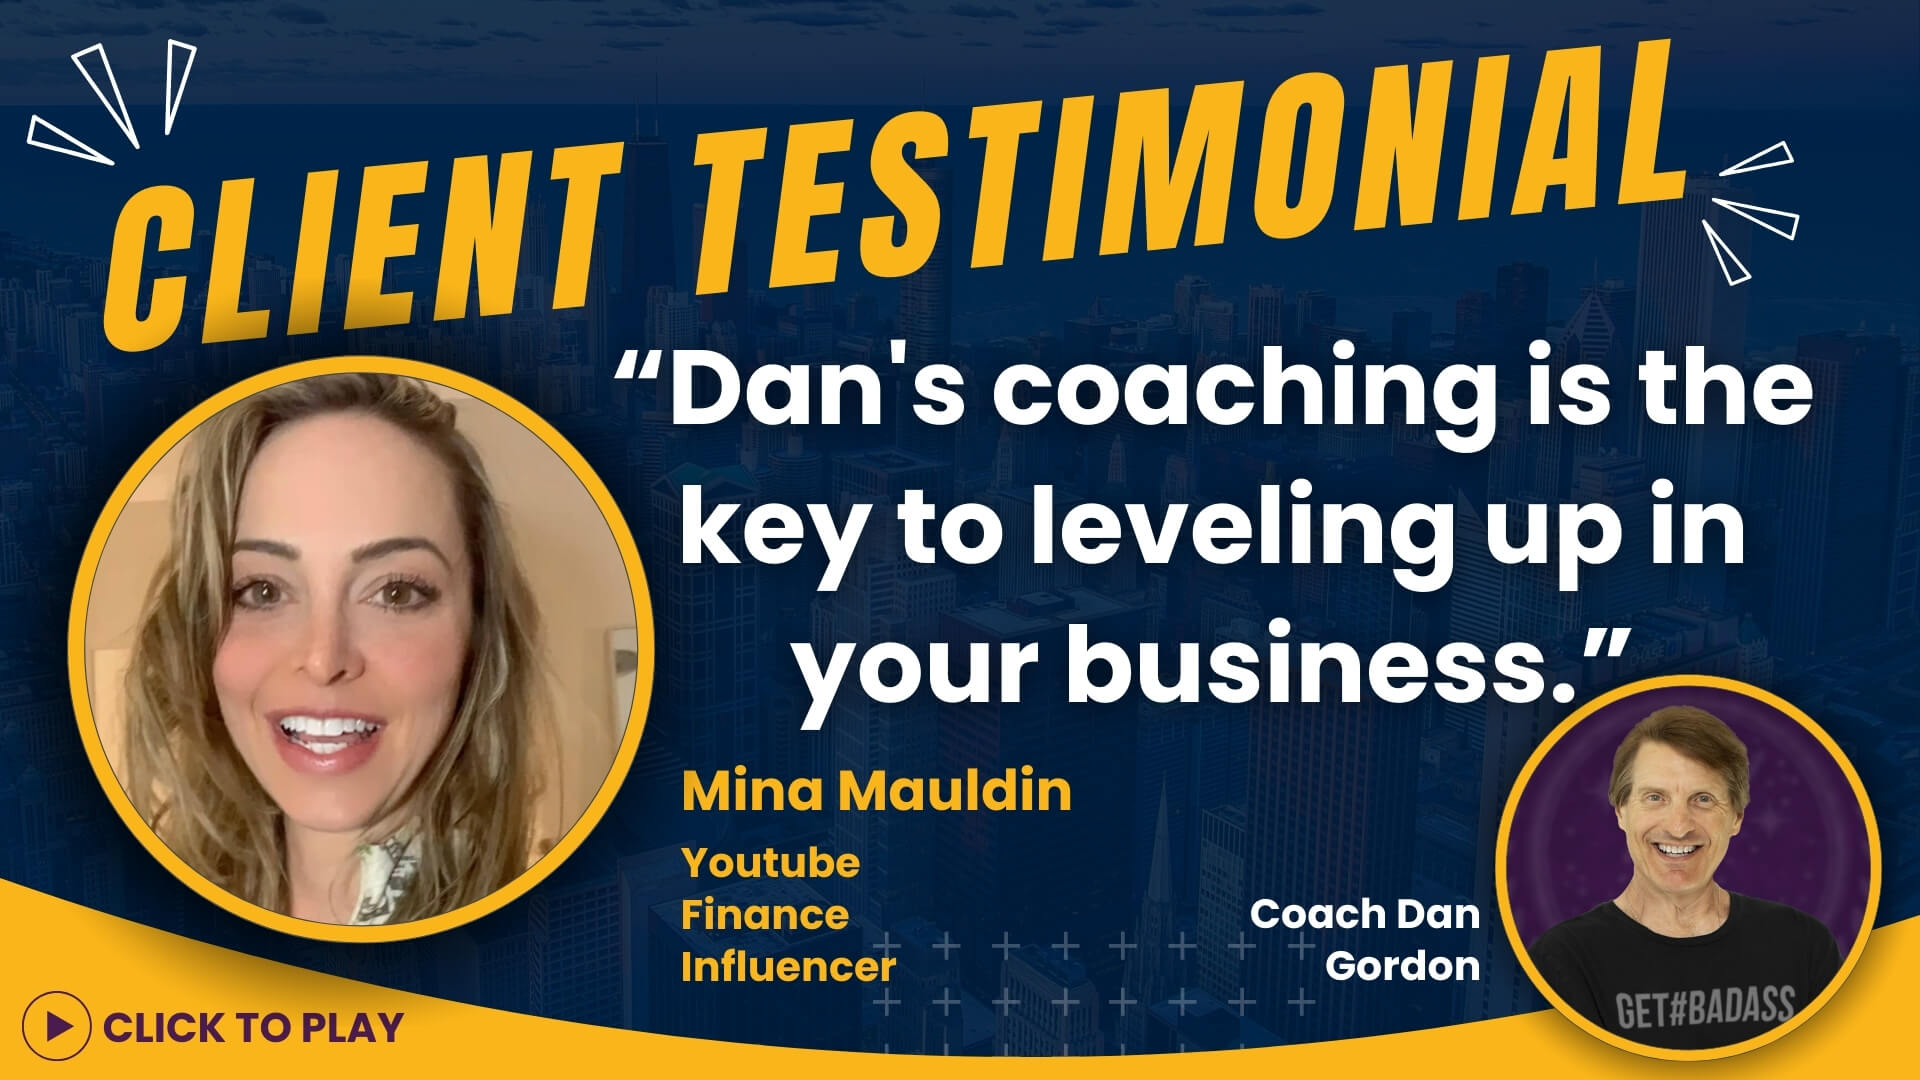 Mina Mauldin, YouTube Finance Influencer, gives a glowing review of Coach Dan Gordon's coaching services.